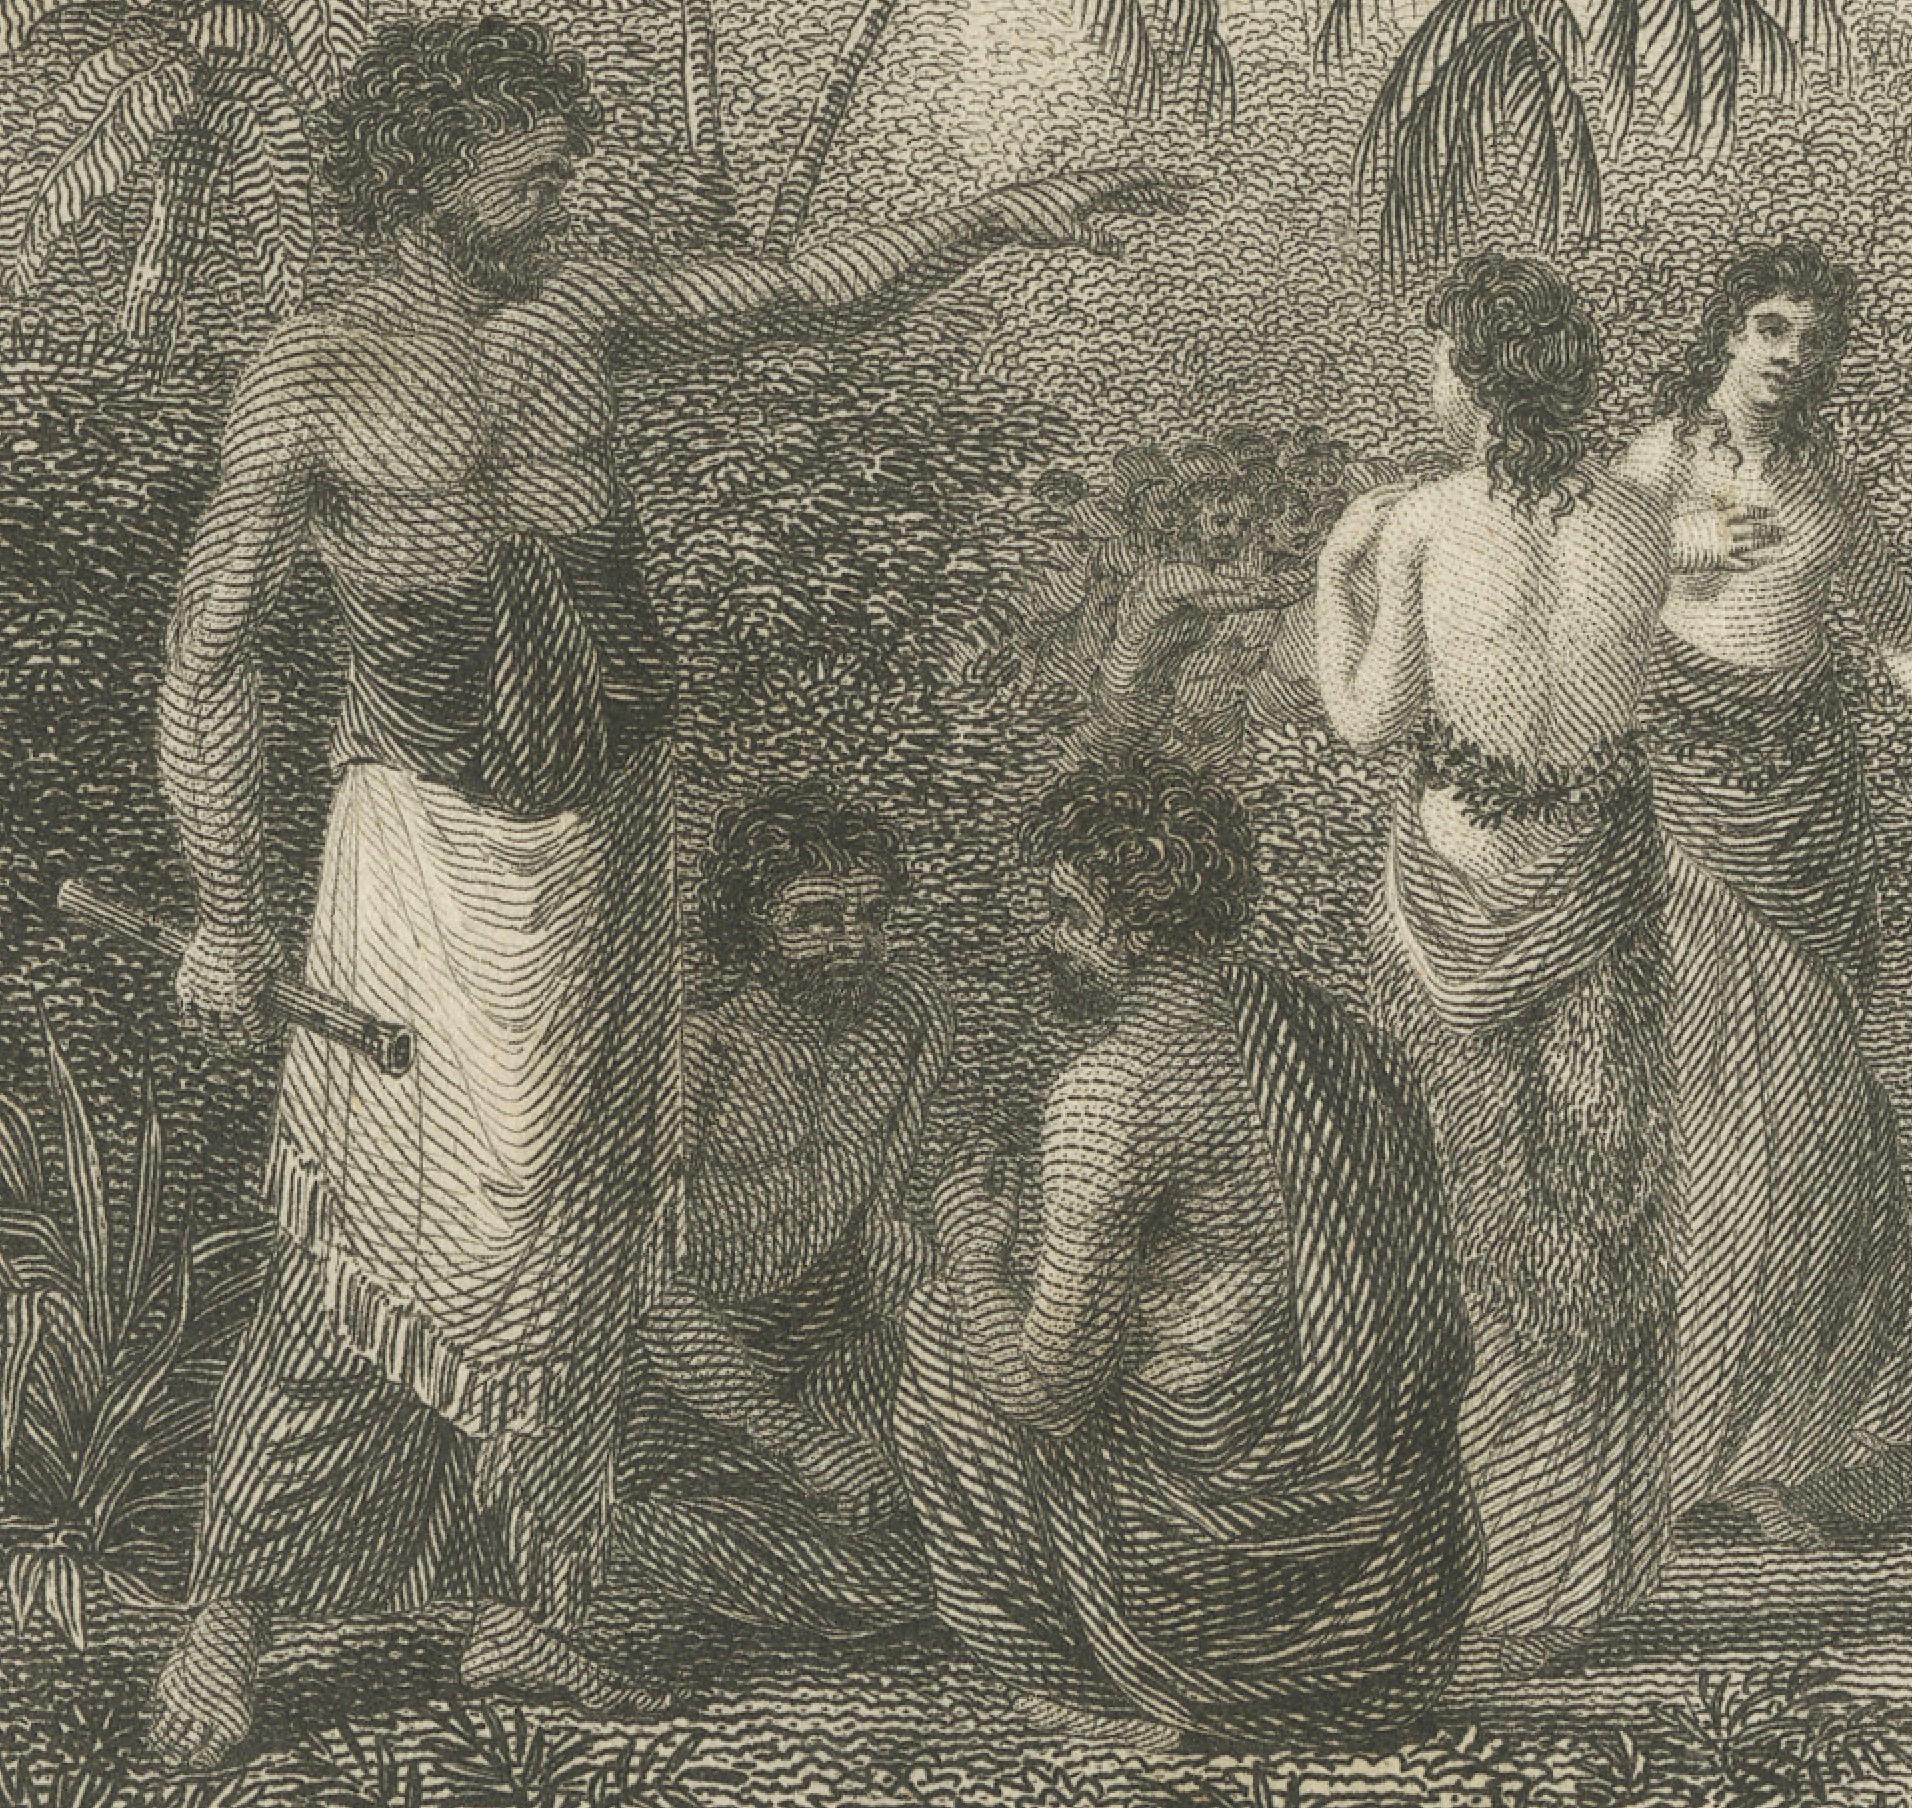 Engraved Rhythms of the Pacific: A Communal Dance in Tonga, Engraving Published in 1812 For Sale